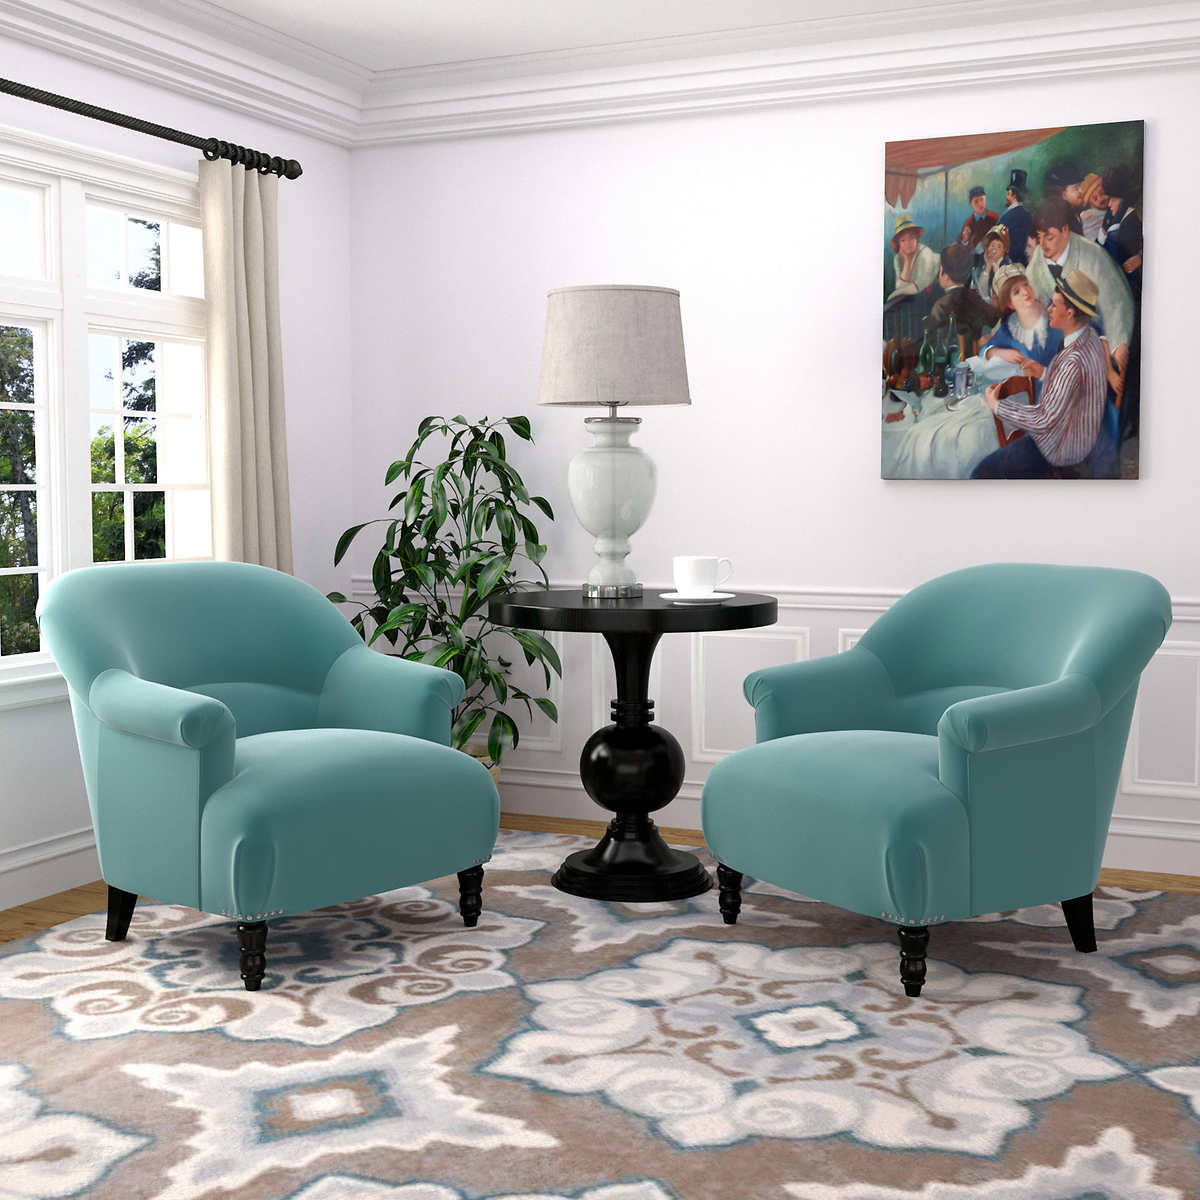 Turquoise Living Room Chair
 Turquoise Living Room Chair – Modern House